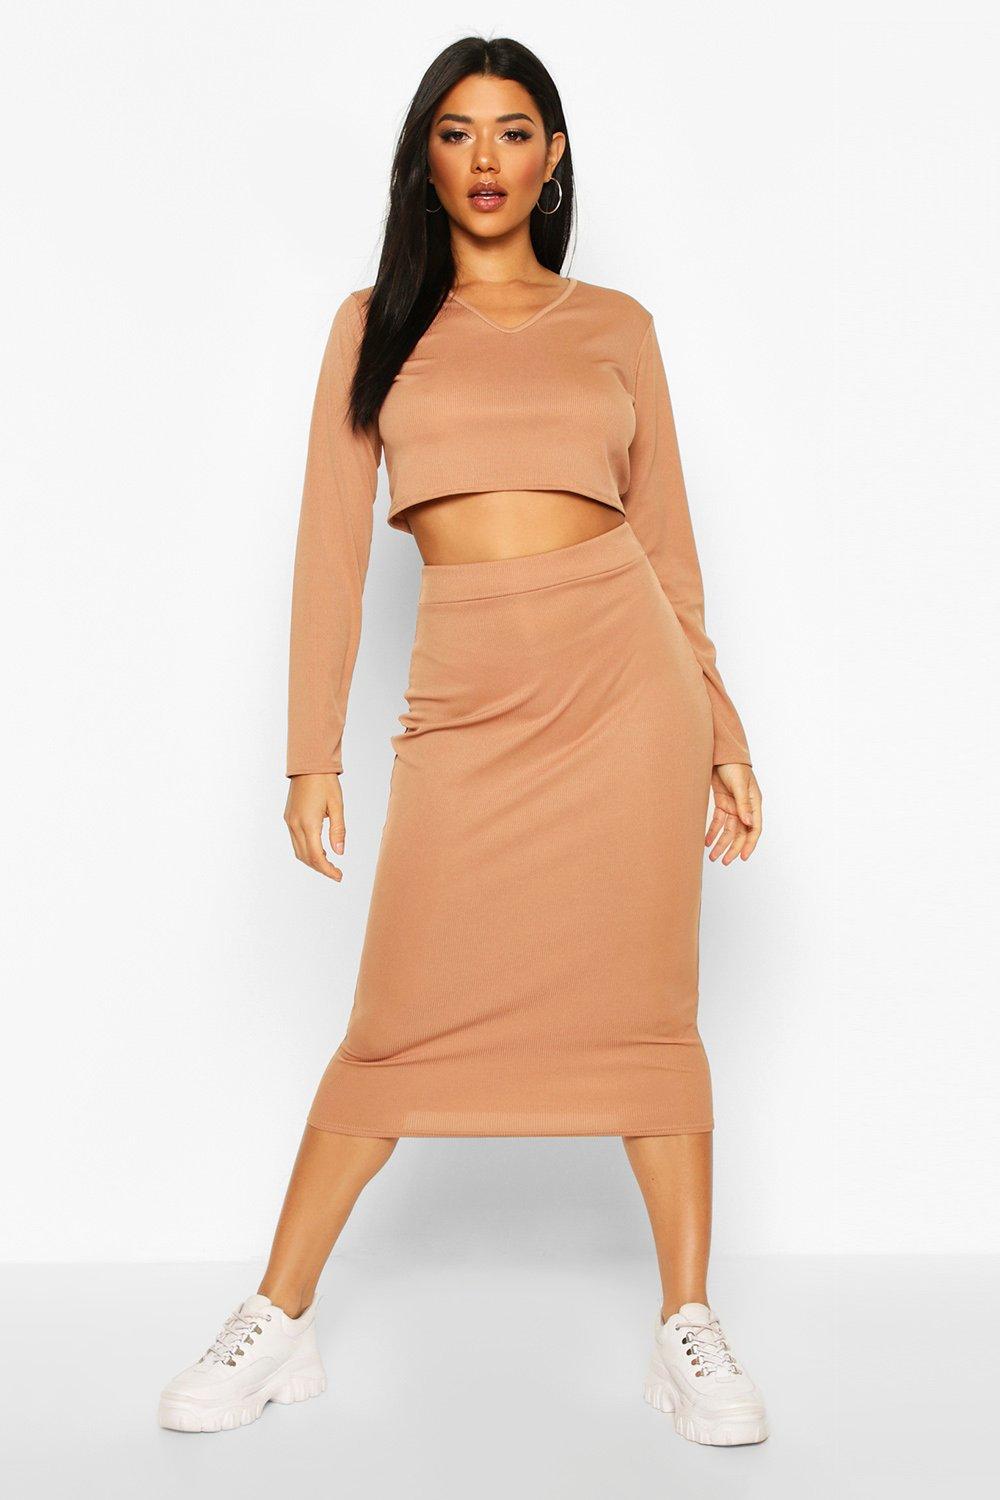 midi skirt and top co ord